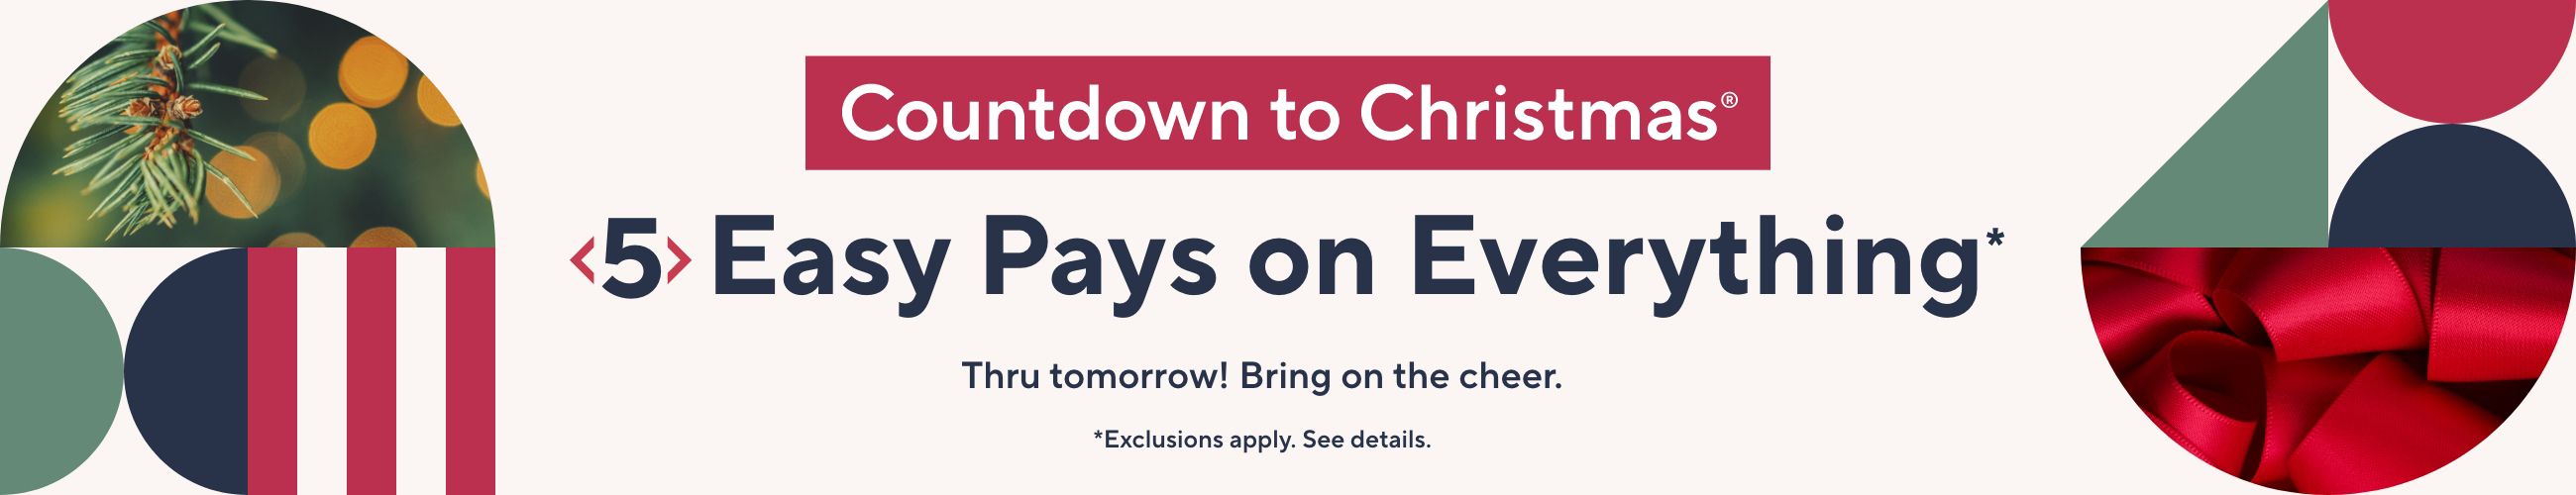 Countdown to Christmas® - 5 Easy Pays on Everything*  Thru tomorrow! Bring on the cheer.  *Exclusions apply. See details. 